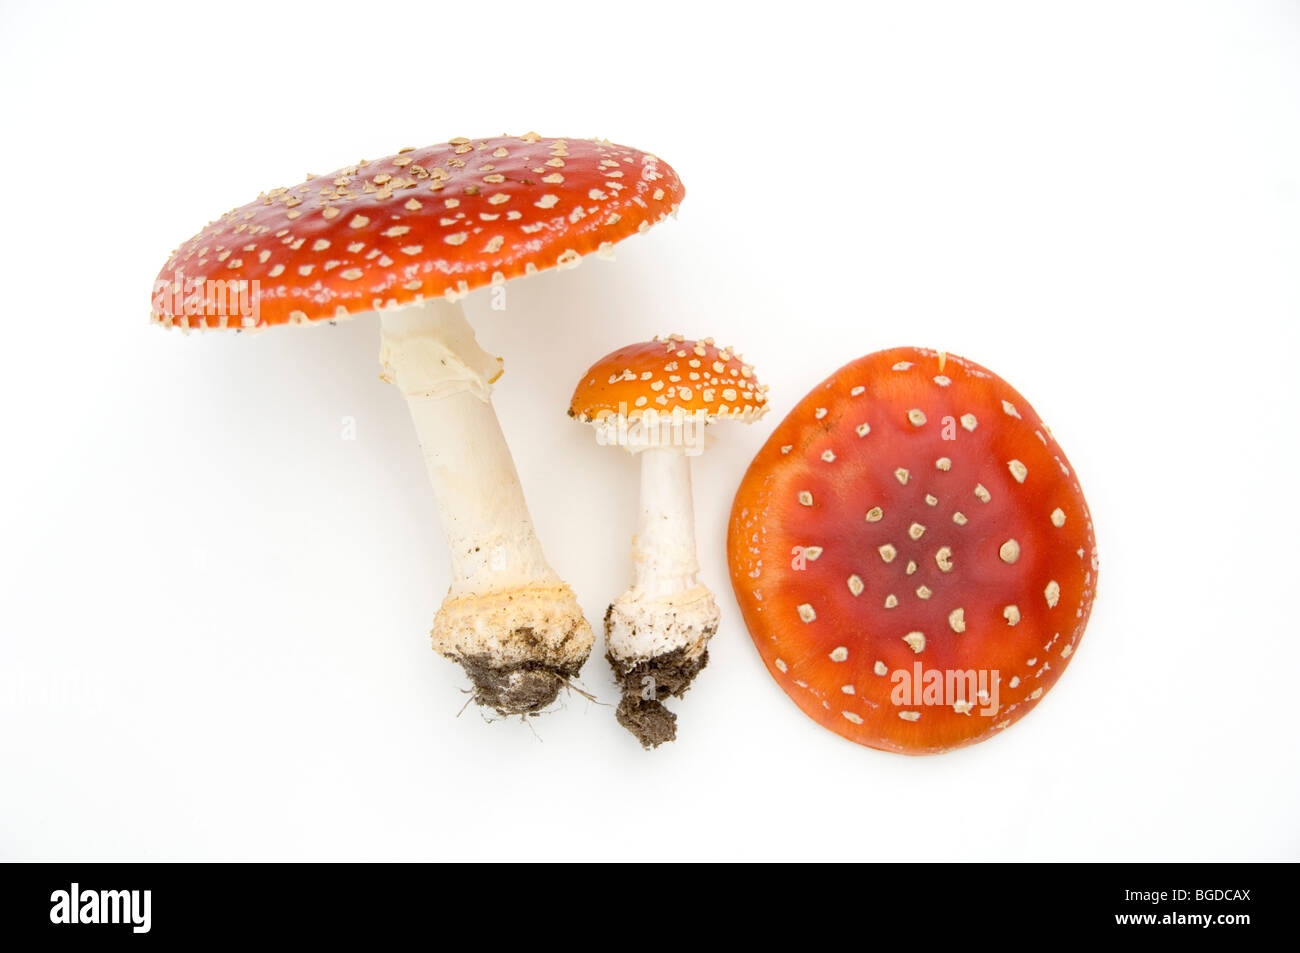 AMANITA MUSCARIA, FLY AGARIC FUNGHI, Sussex. Foto Stock